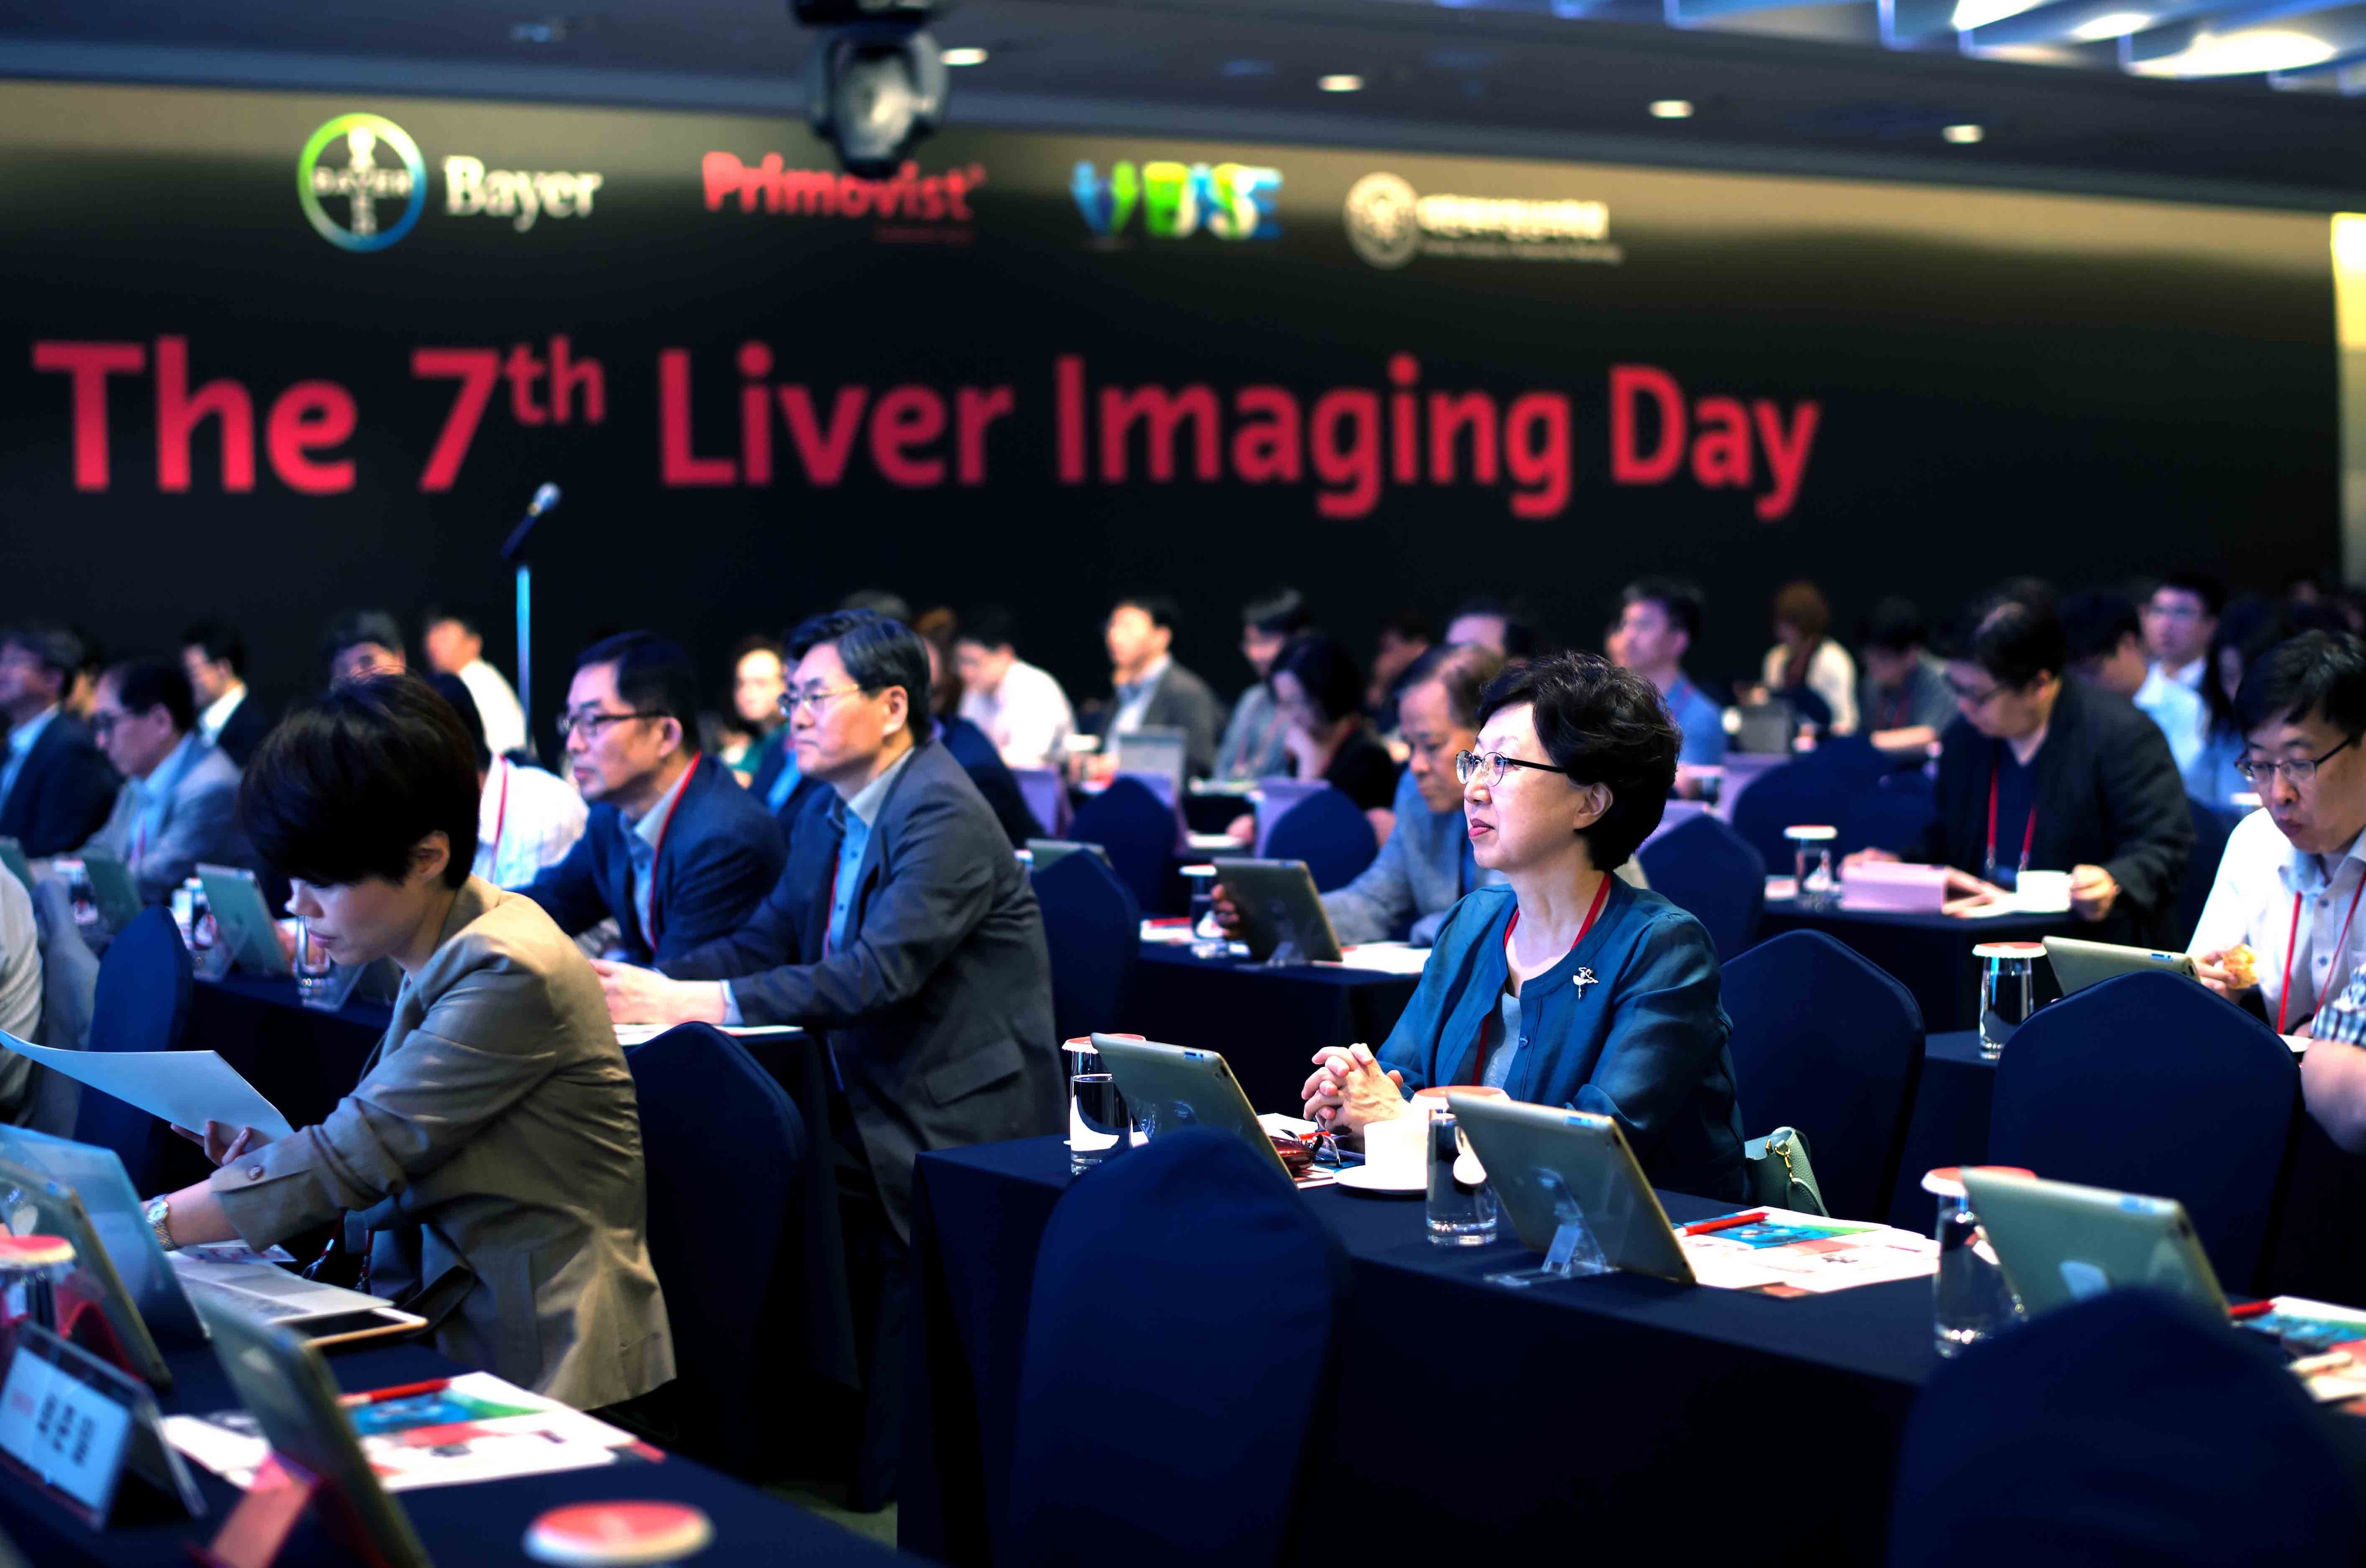 Liver imaging day 2017 preview image